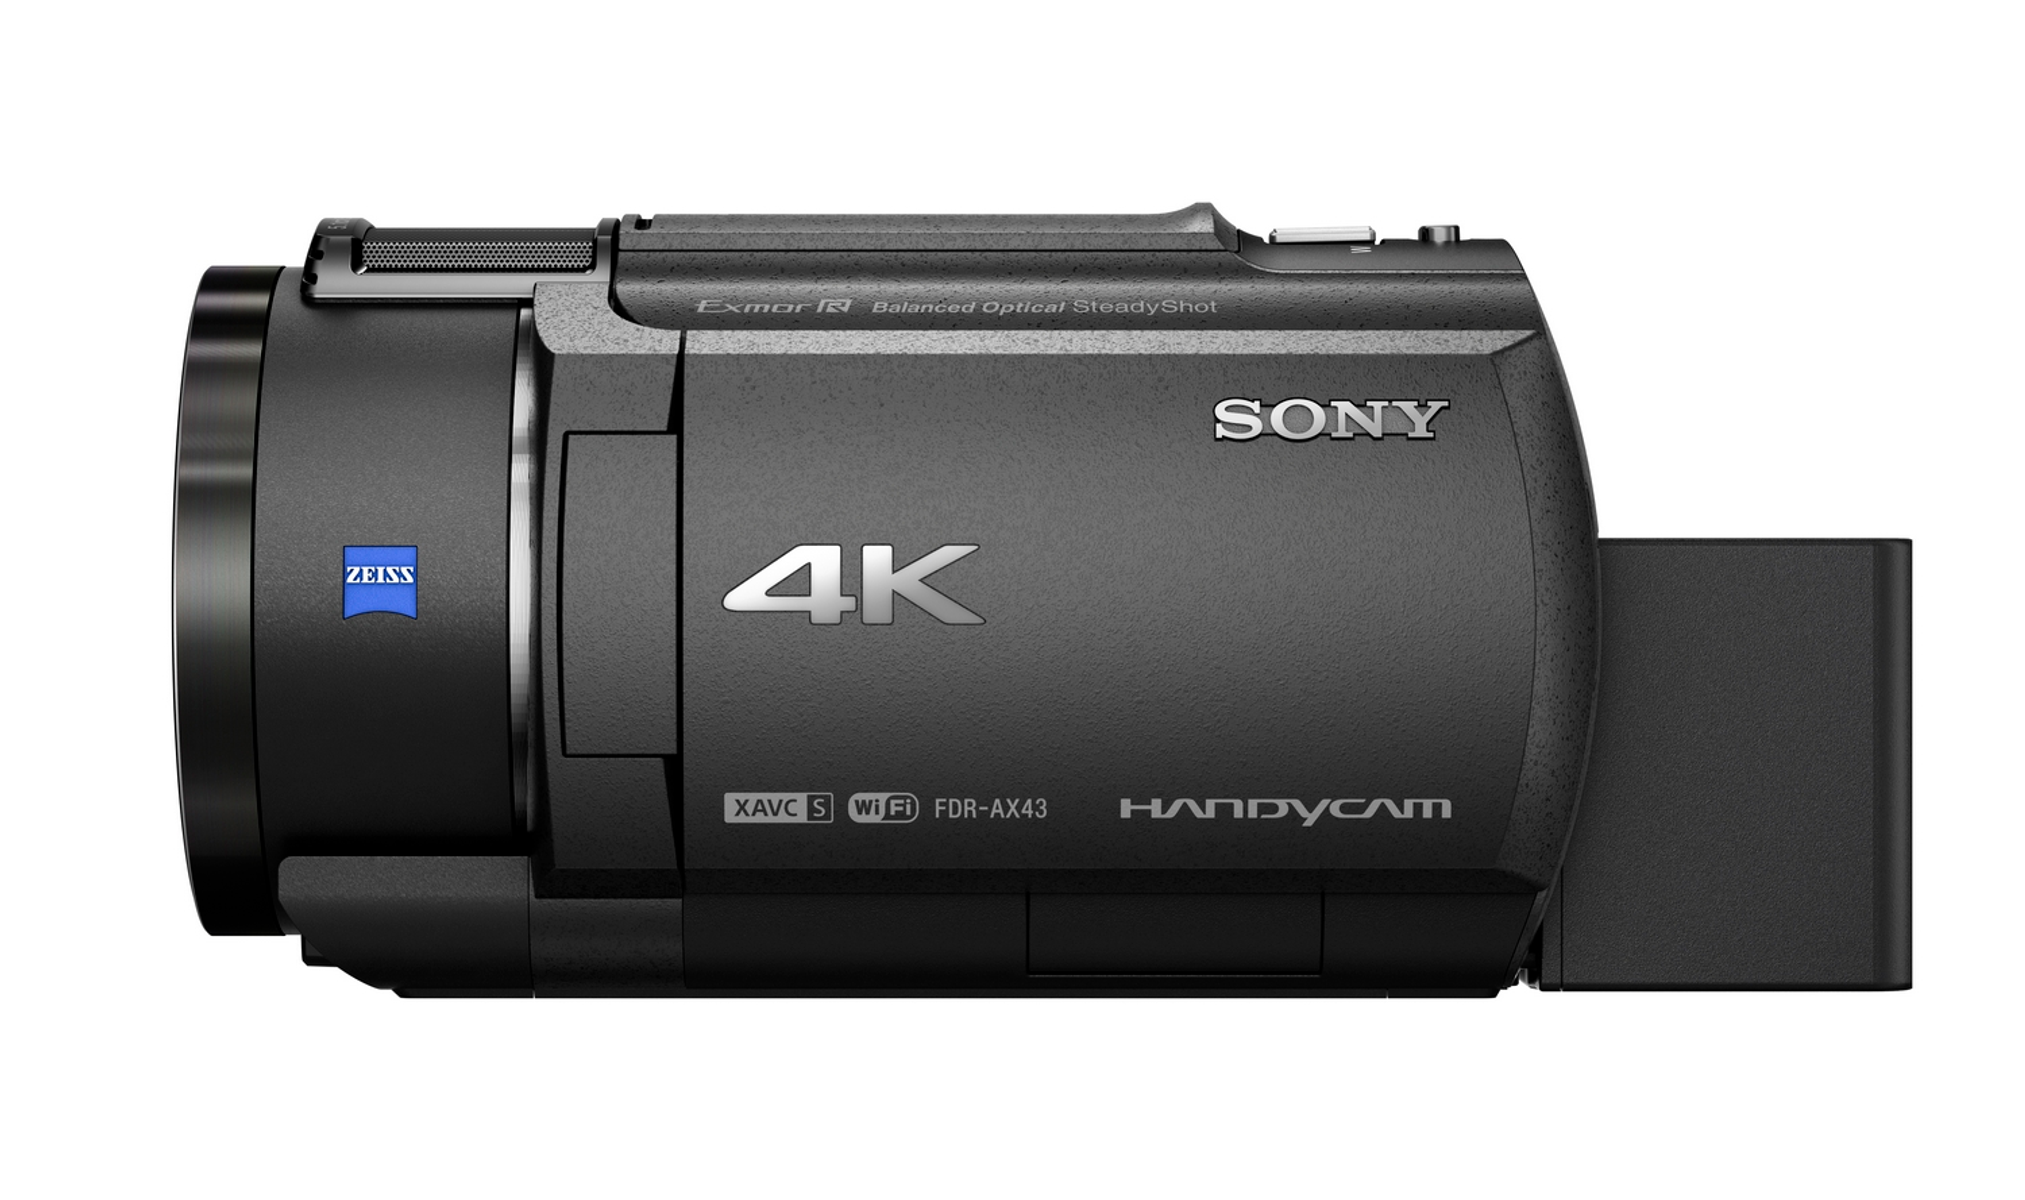 Camcorder 20xopt. FDR-AX Zoom SONY 43 , 4K